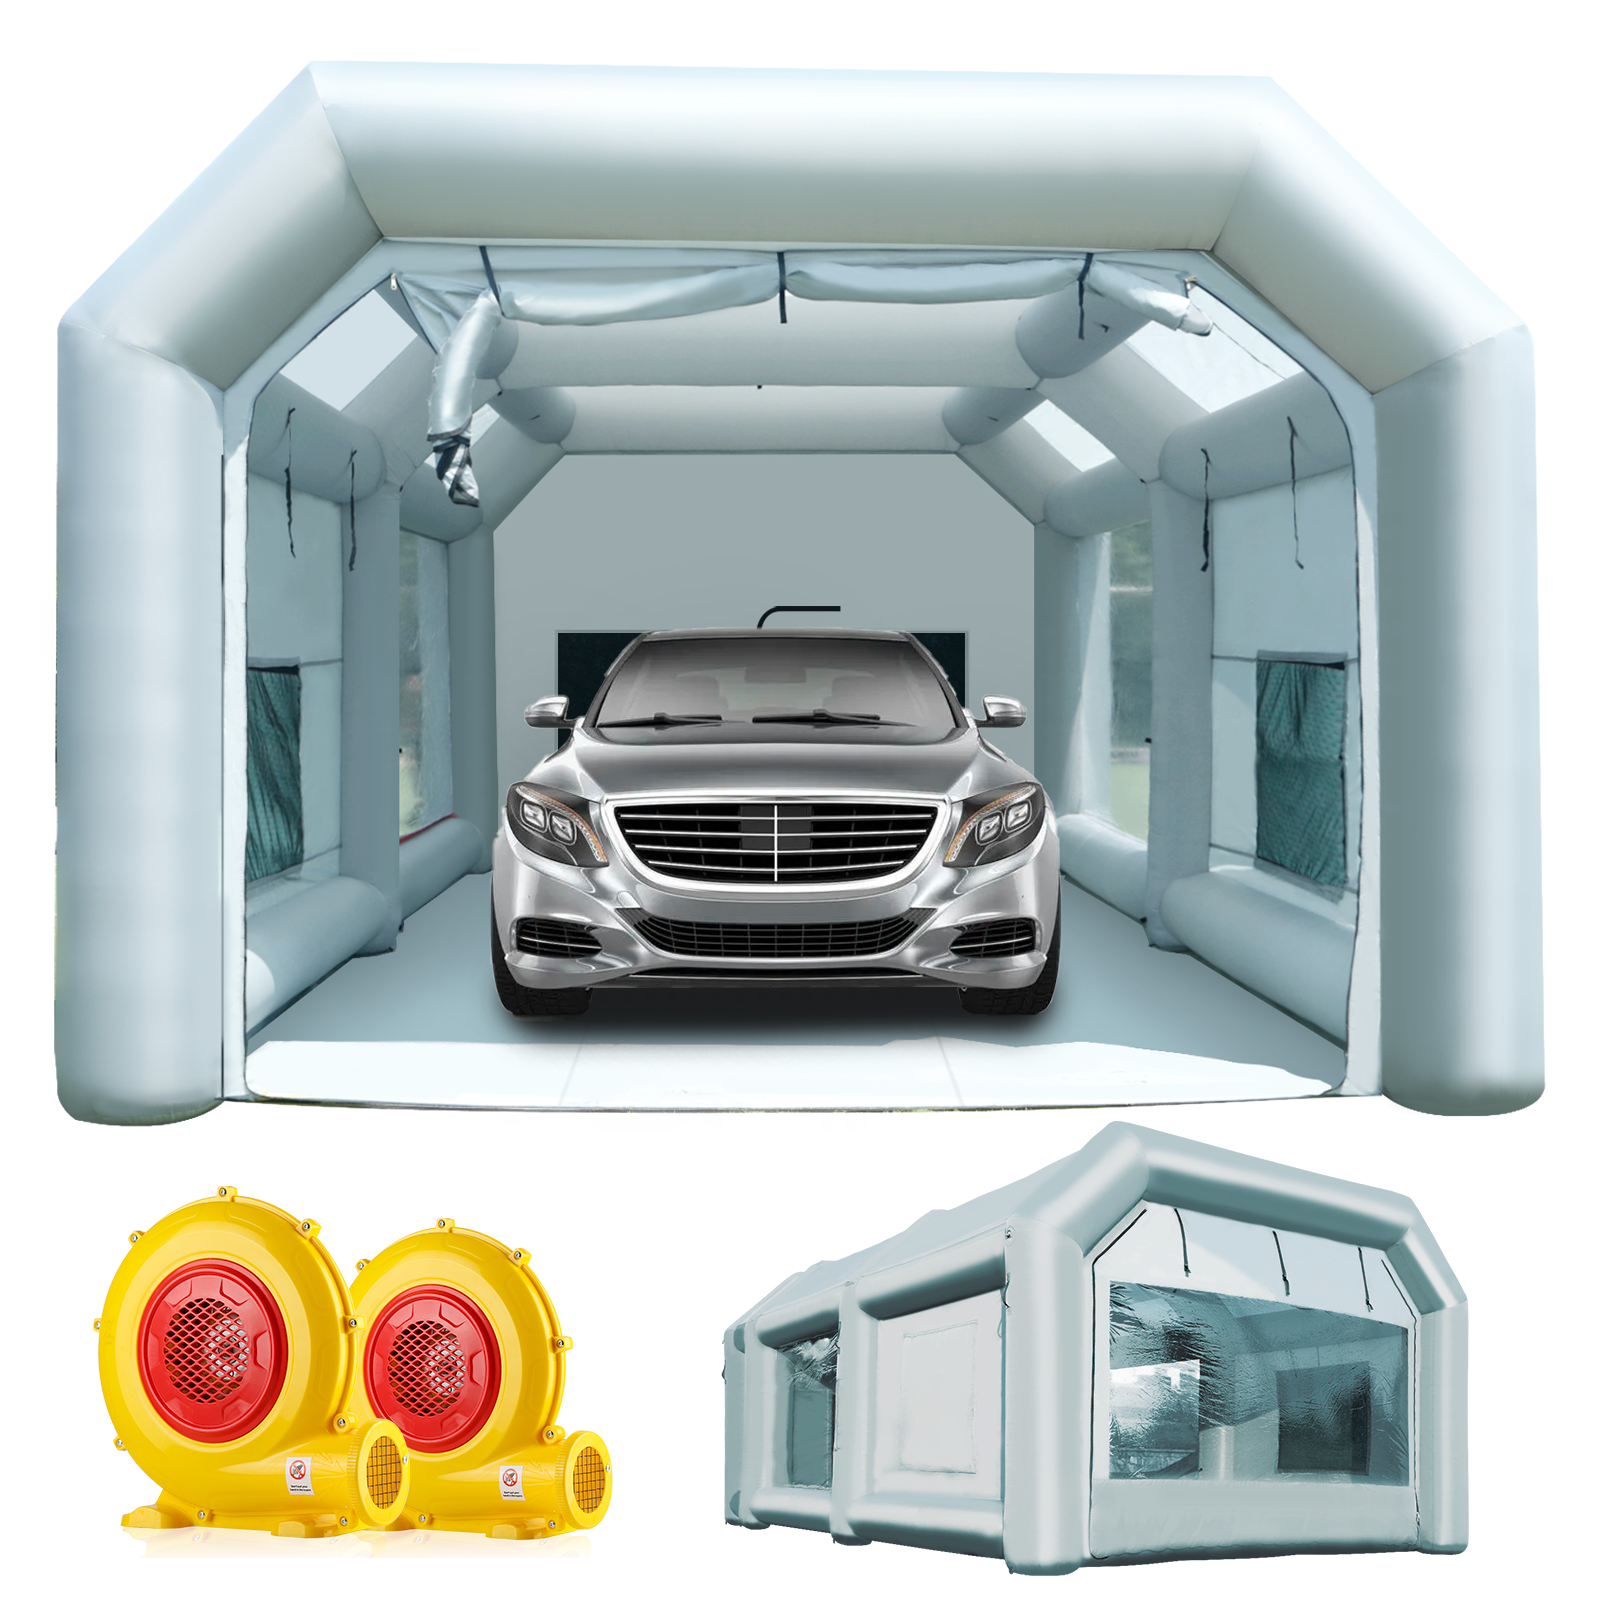 Sewinfla Inflatable Paint Booth Air Draft Device for Indoor (Elephant